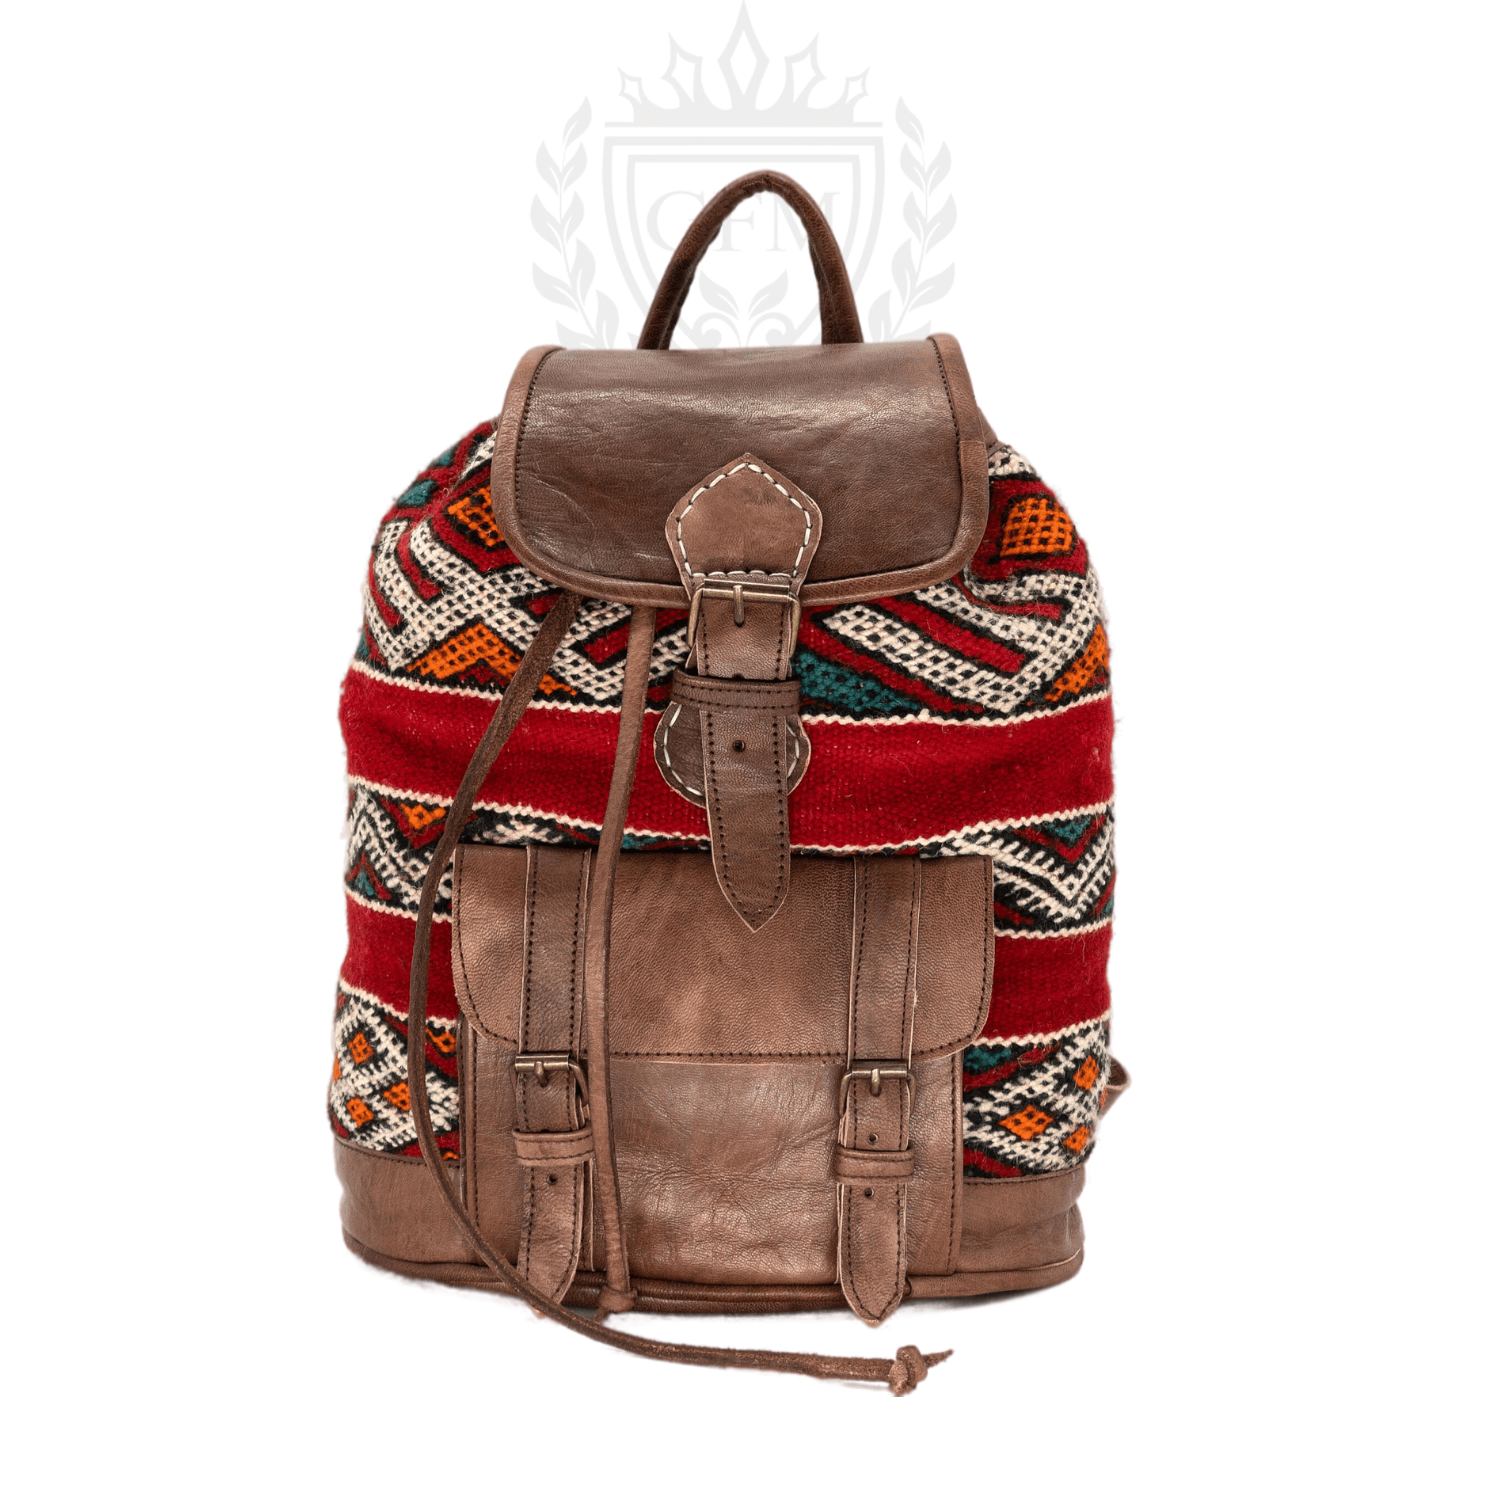 Moroccan Kilim Leather Backpack - Versatile and Unique